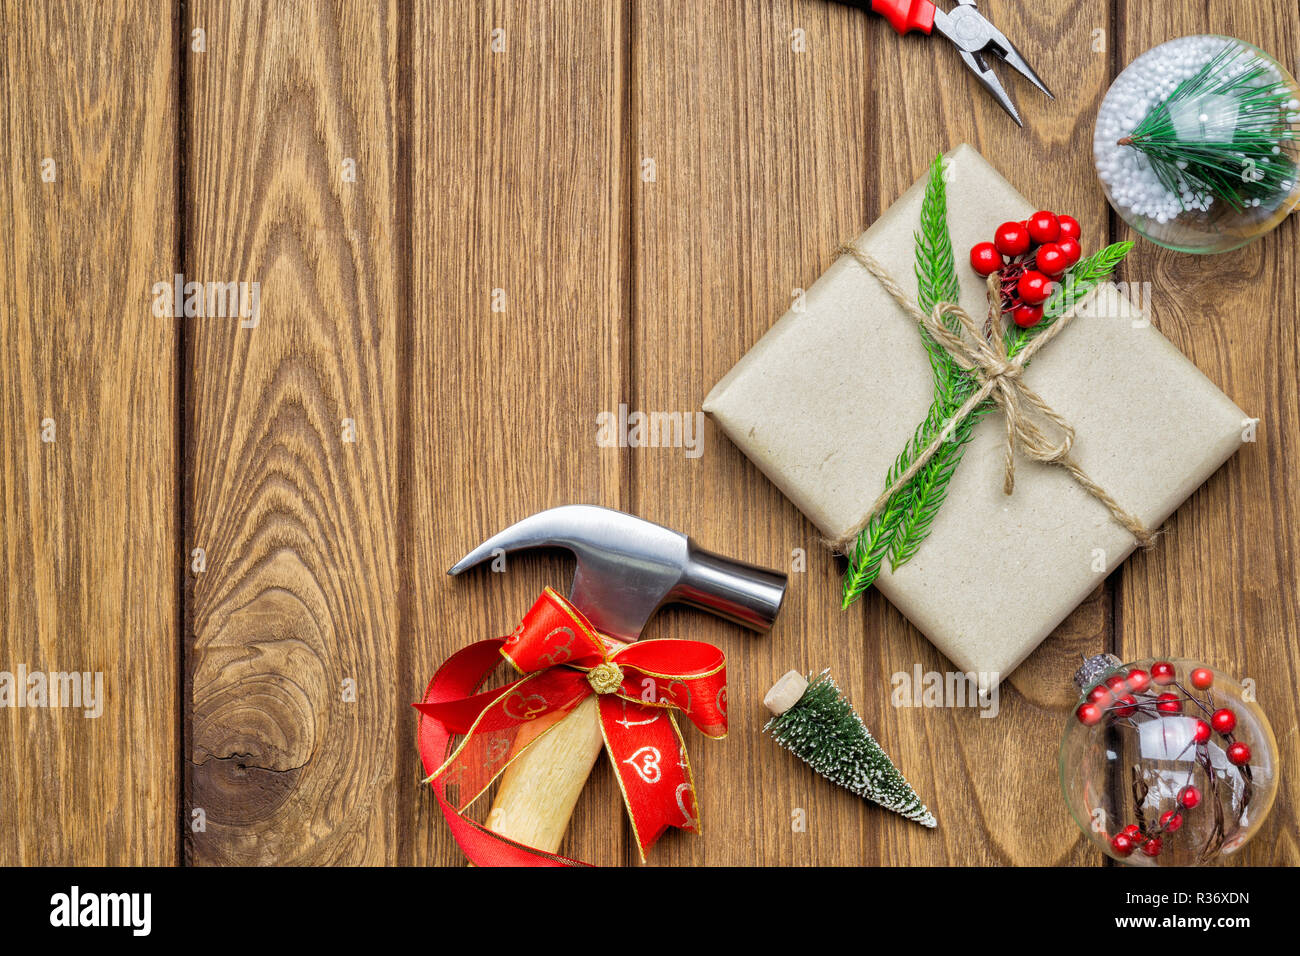 Merry Christmas Handy Tools Christmas Gift Concept Hammer Pliers Gift Box And Christmas Ornament Decorations On Wood Background Top View With Copy Stock Photo Alamy